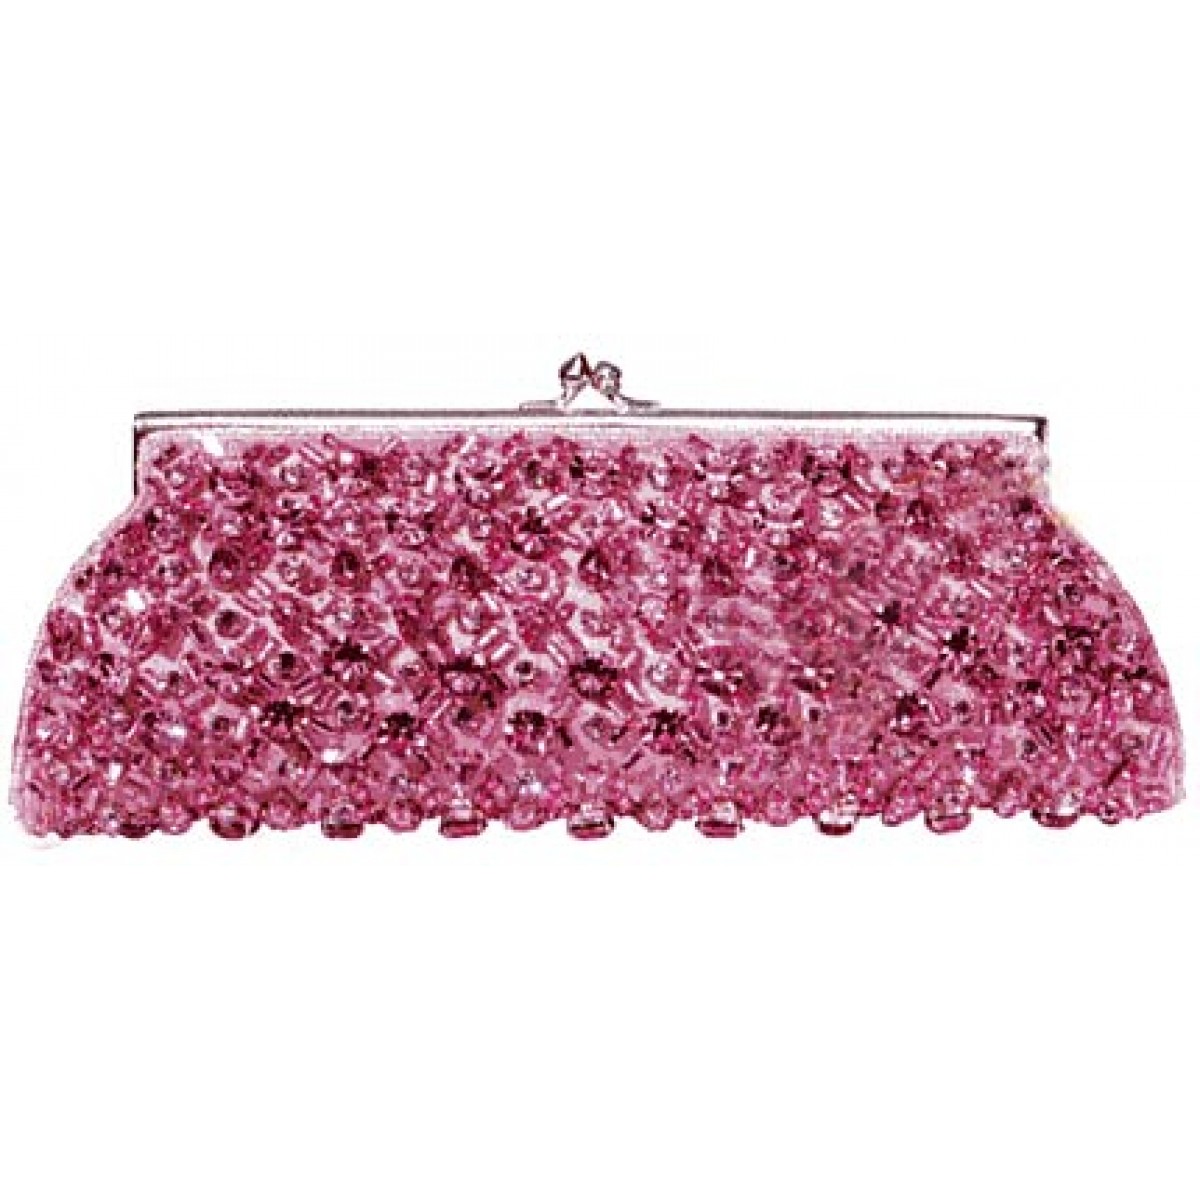 Dazzling Pearl and Crystal Encrusted Clutch